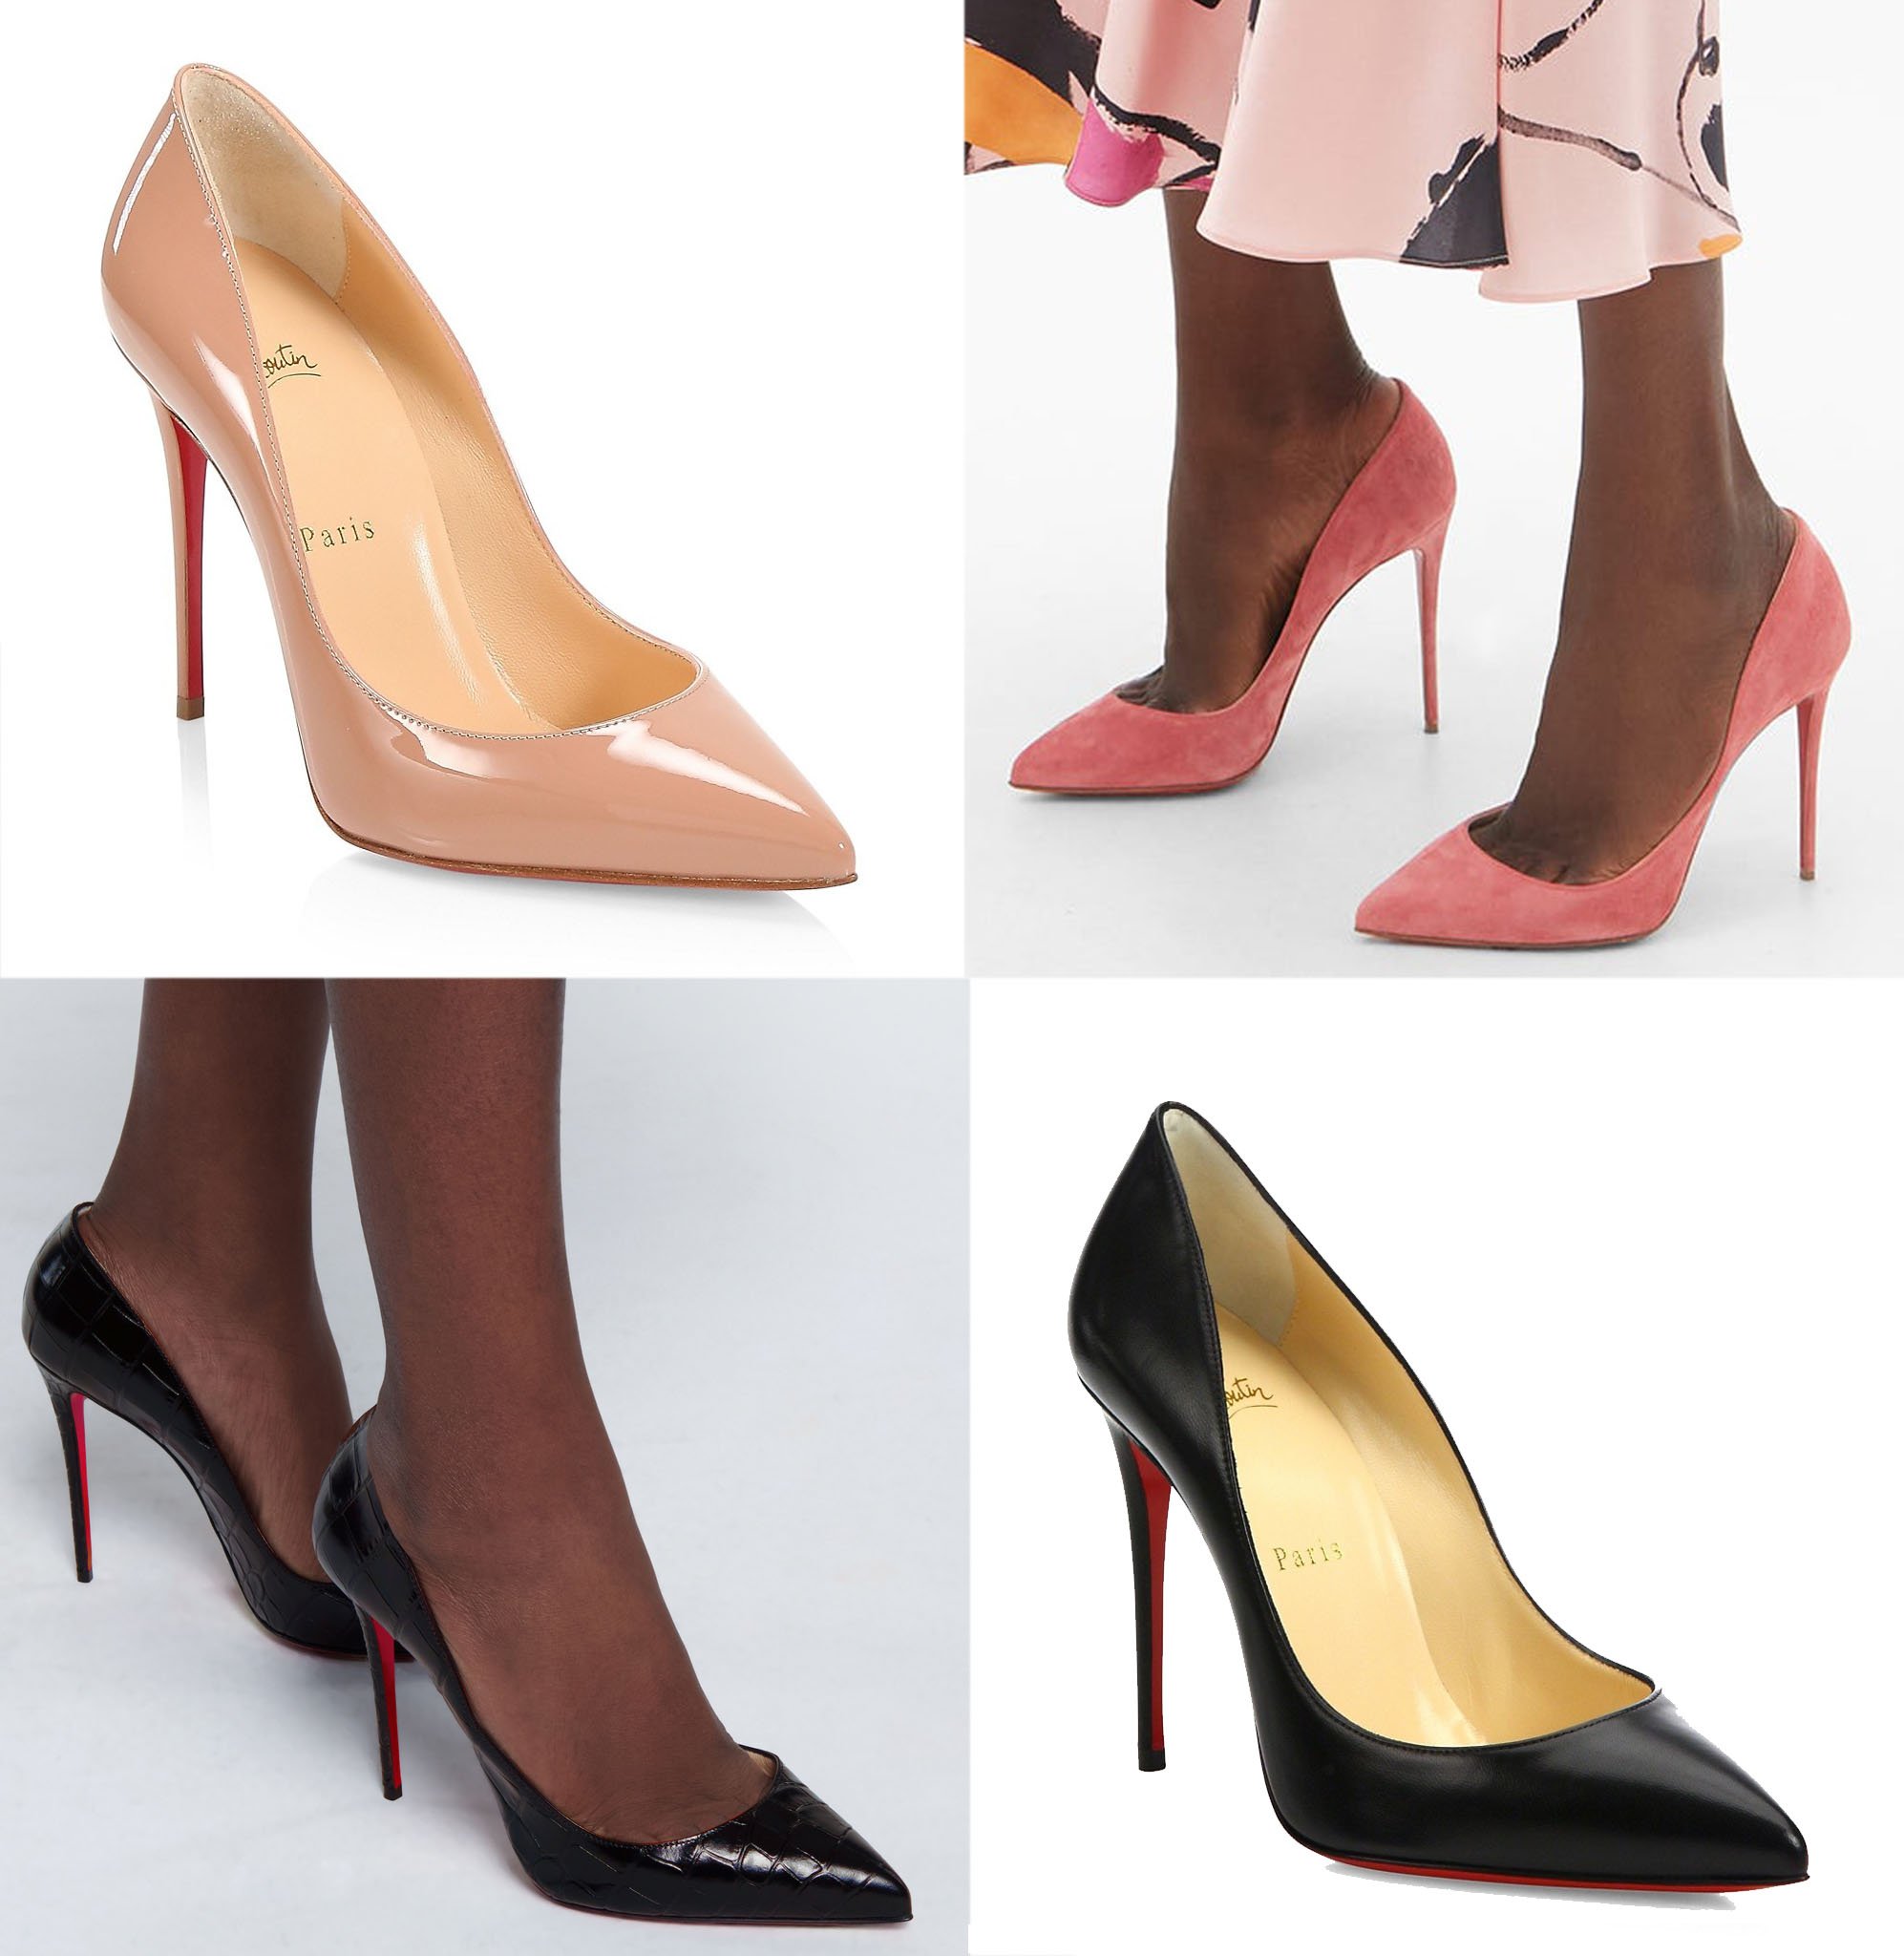 Vocosi Red Sole Pumps vs. Christian Louboutin's. A very detailed